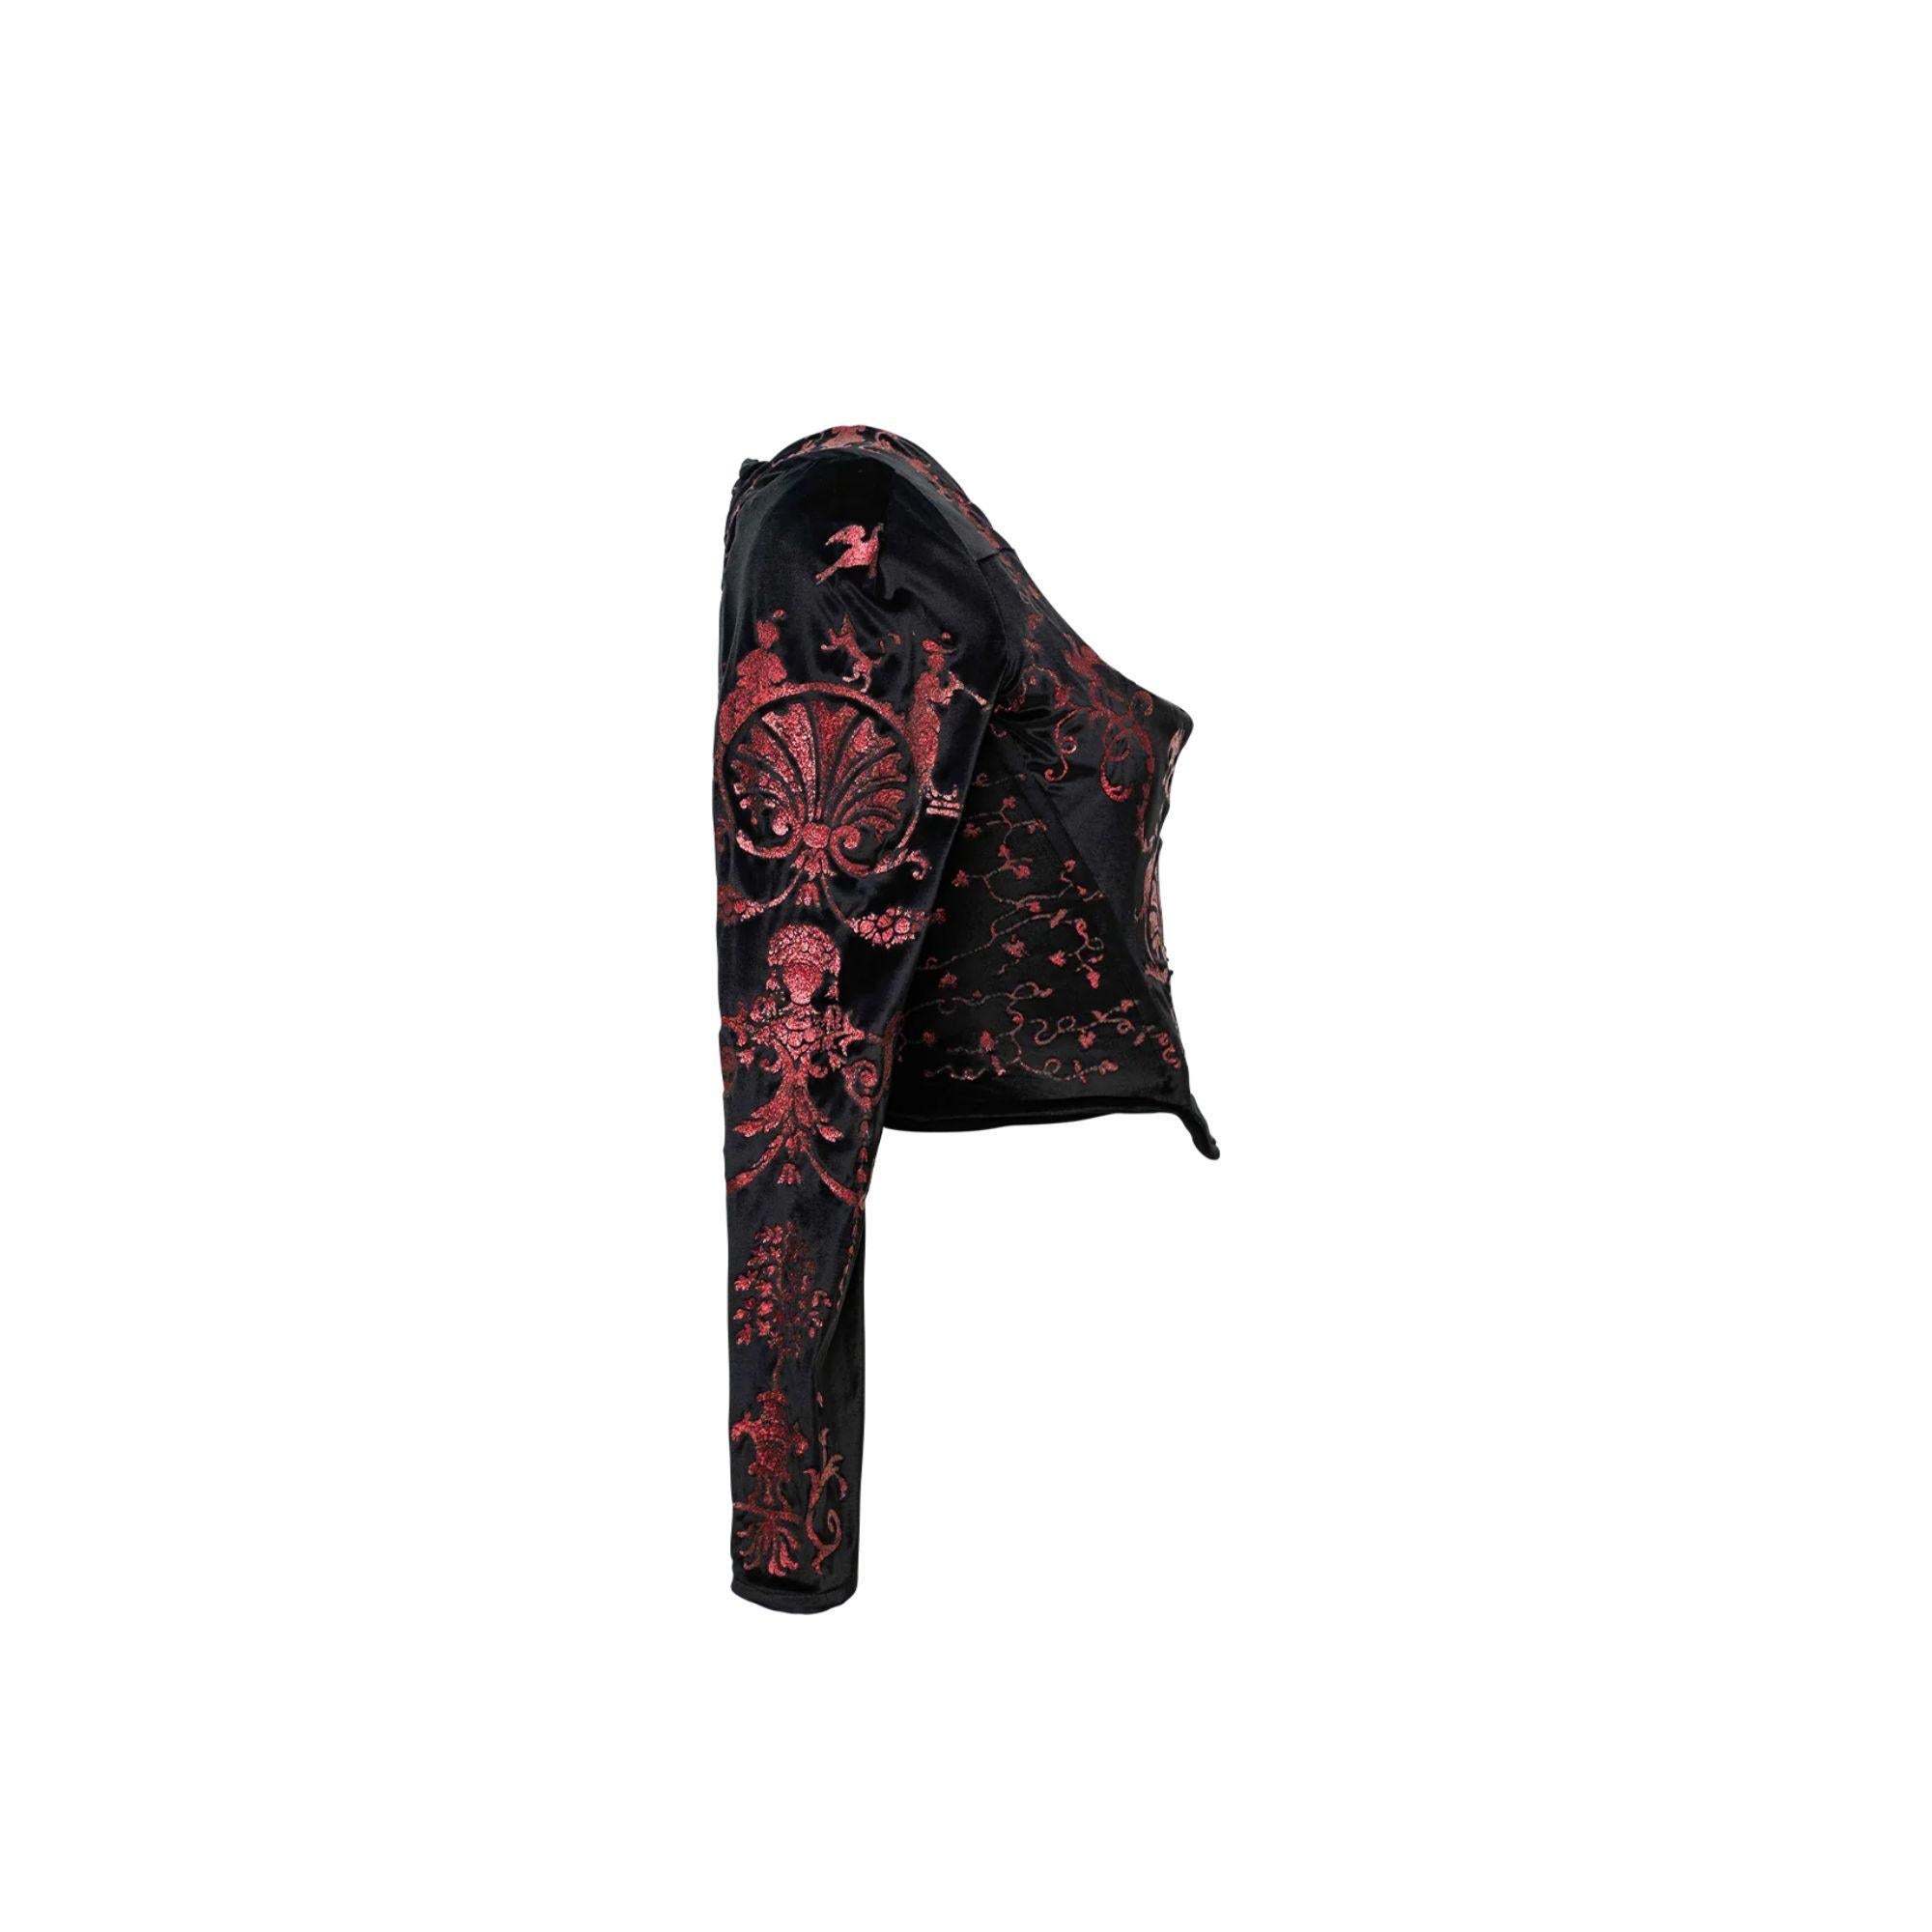 S/S 1992 Red Label Vivienne Westwood ‘Salon’ Collection black voided velvet corset with pink metallic-stencilled details. Neoclassical printed ‘Boulle’ designs inspired by the Mirror with Marquetry by Andre-Charles Boulle (1713). Back zip enclosure,